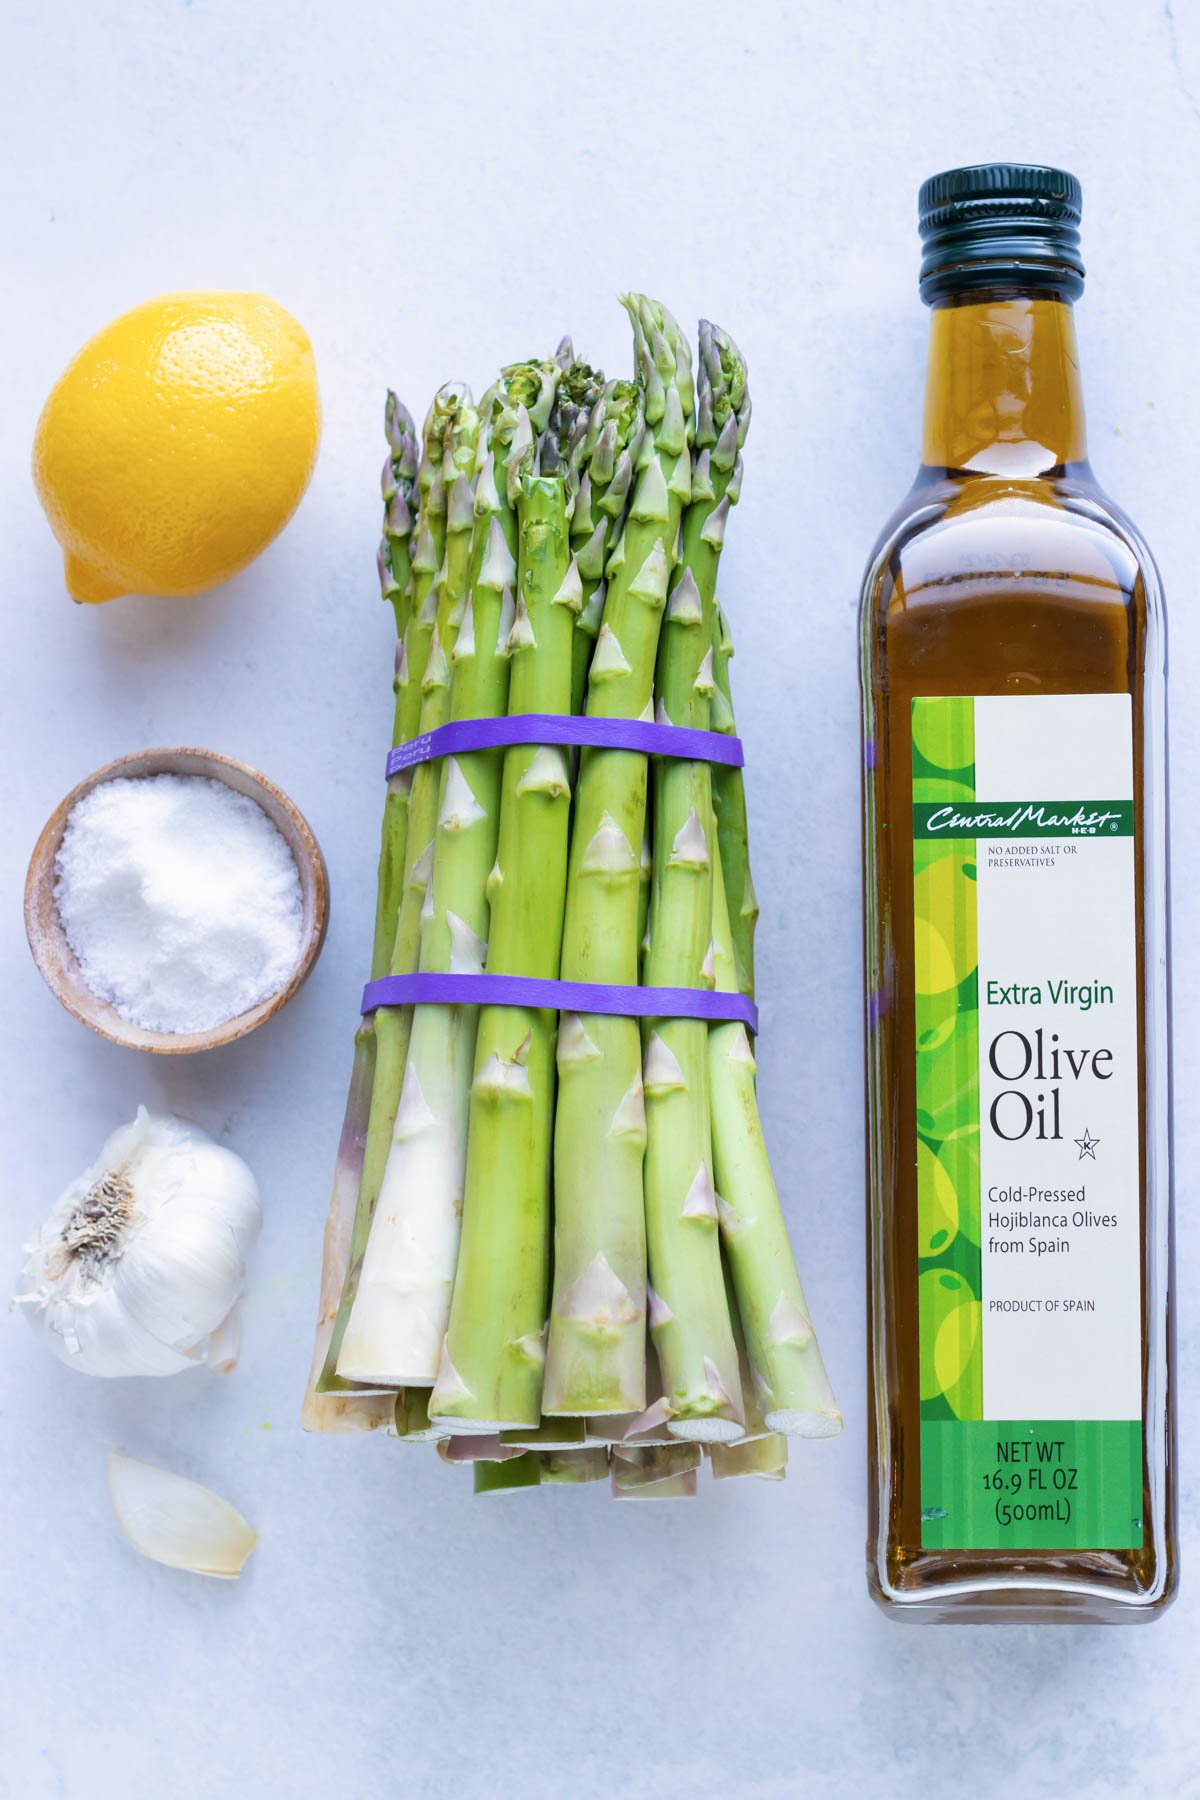 A bunch of asparagus, olive oil, lemon, salt, and garlic as the ingredients for a roasted asparagus recipe.